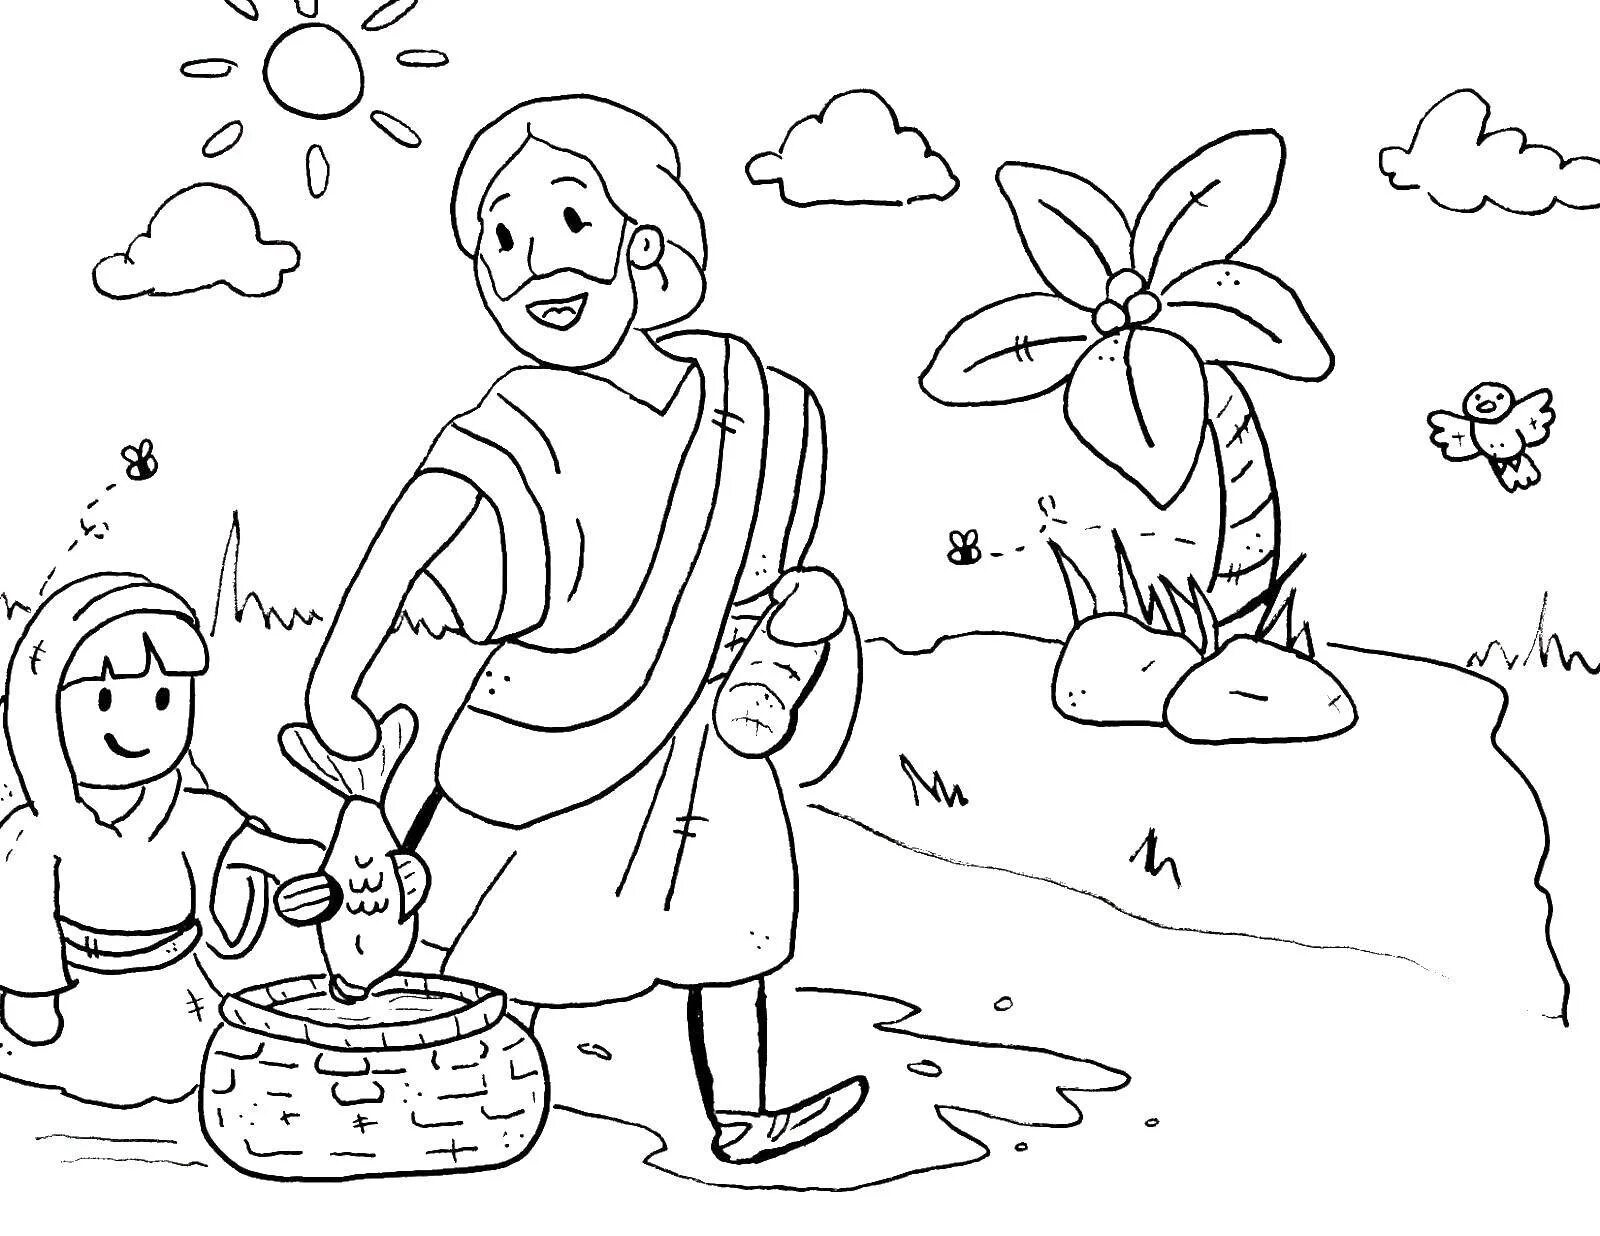 Living christian coloring book for kids